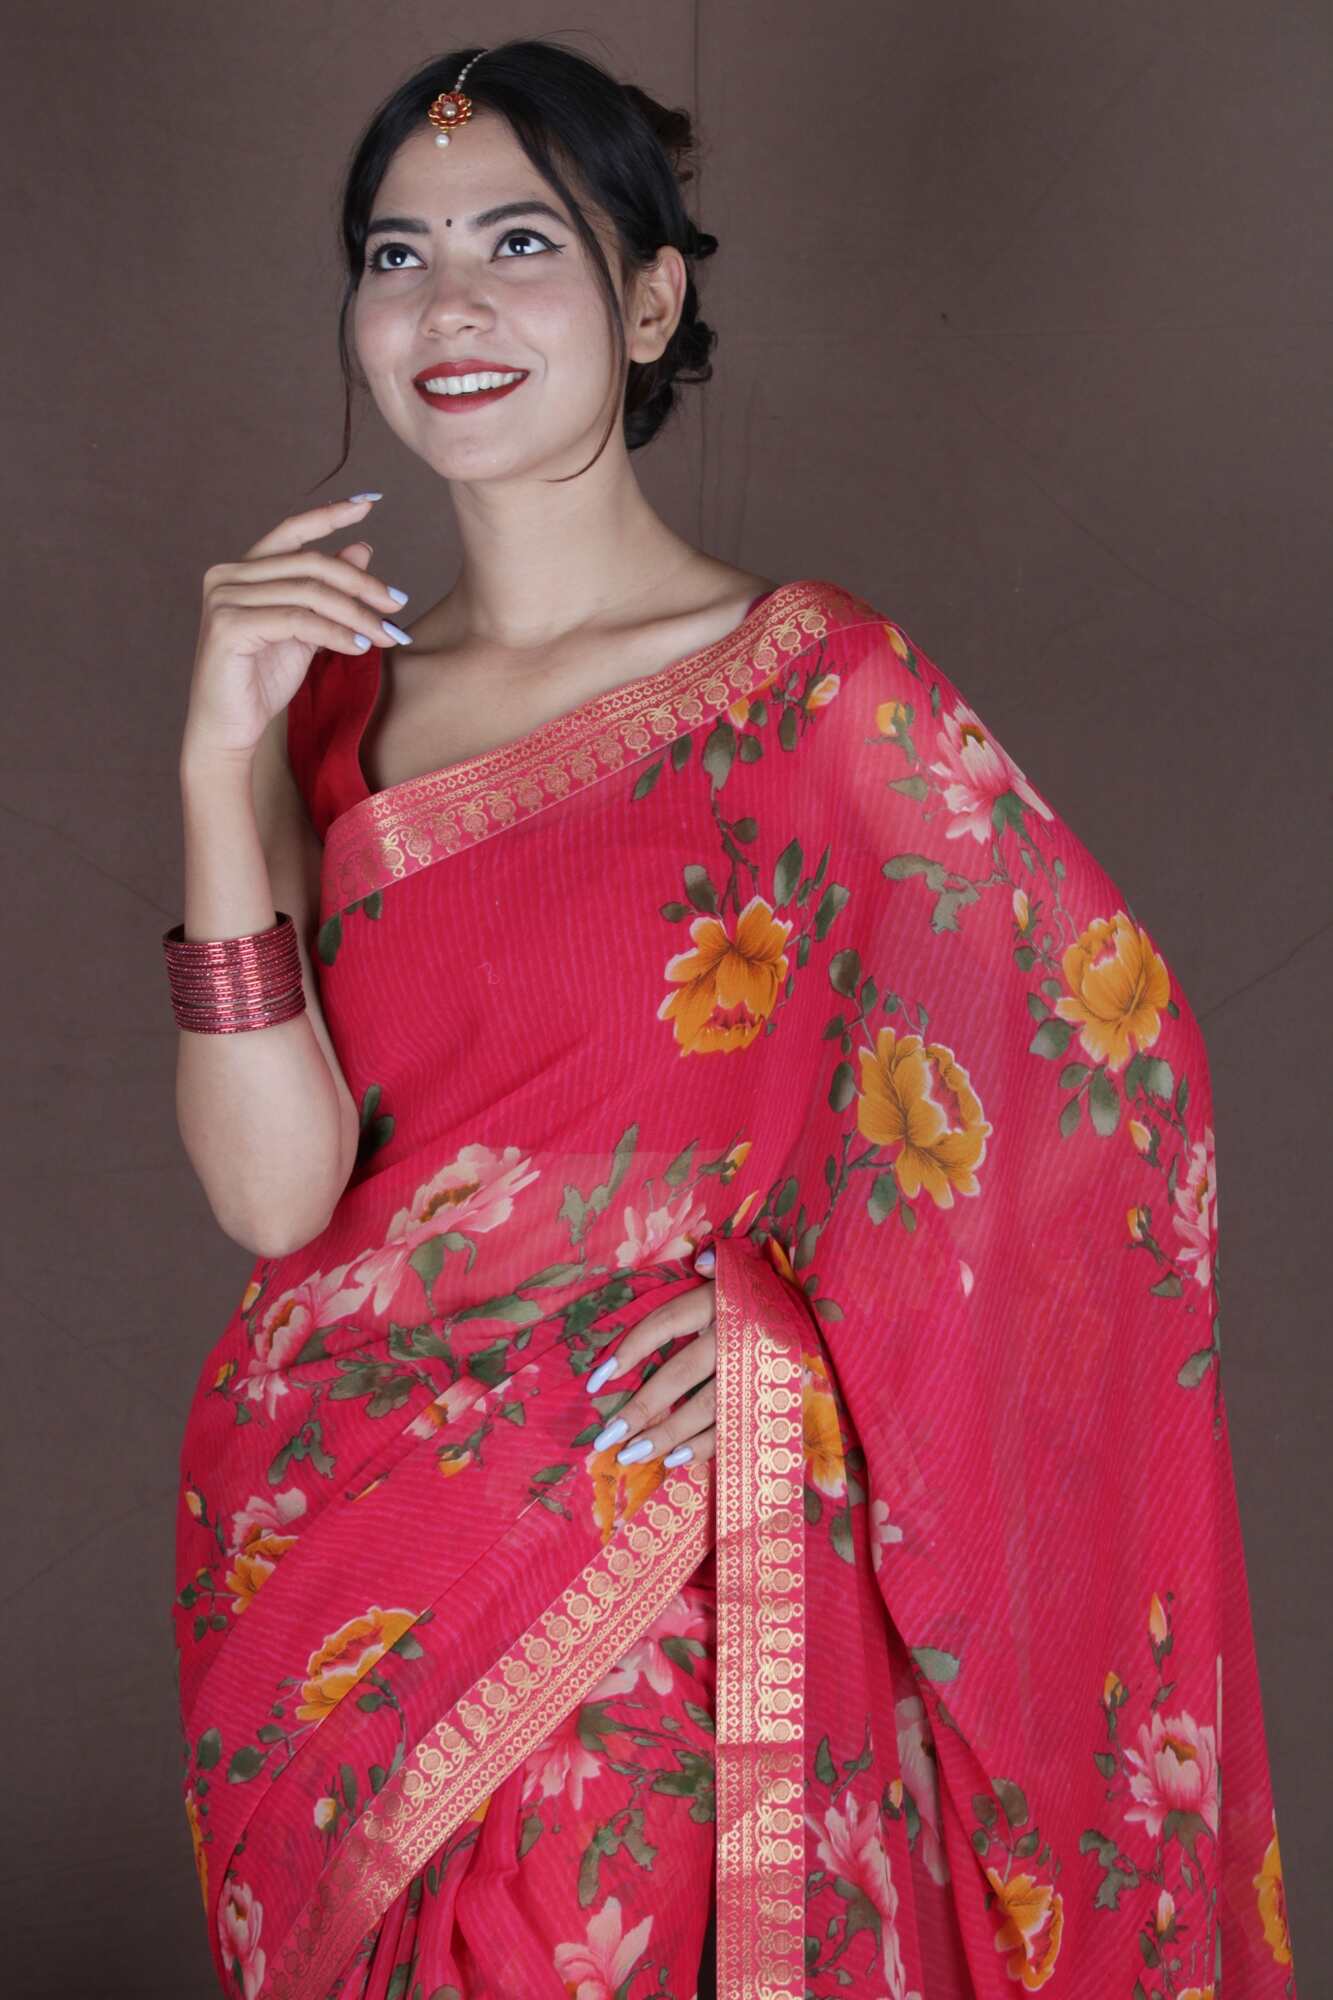 Wrap in 1 Minute Red Georgette Flower Printed with Lace Border Ready to Wear Saree With Ready Made Blouse - Isadora Life Online Shopping Store